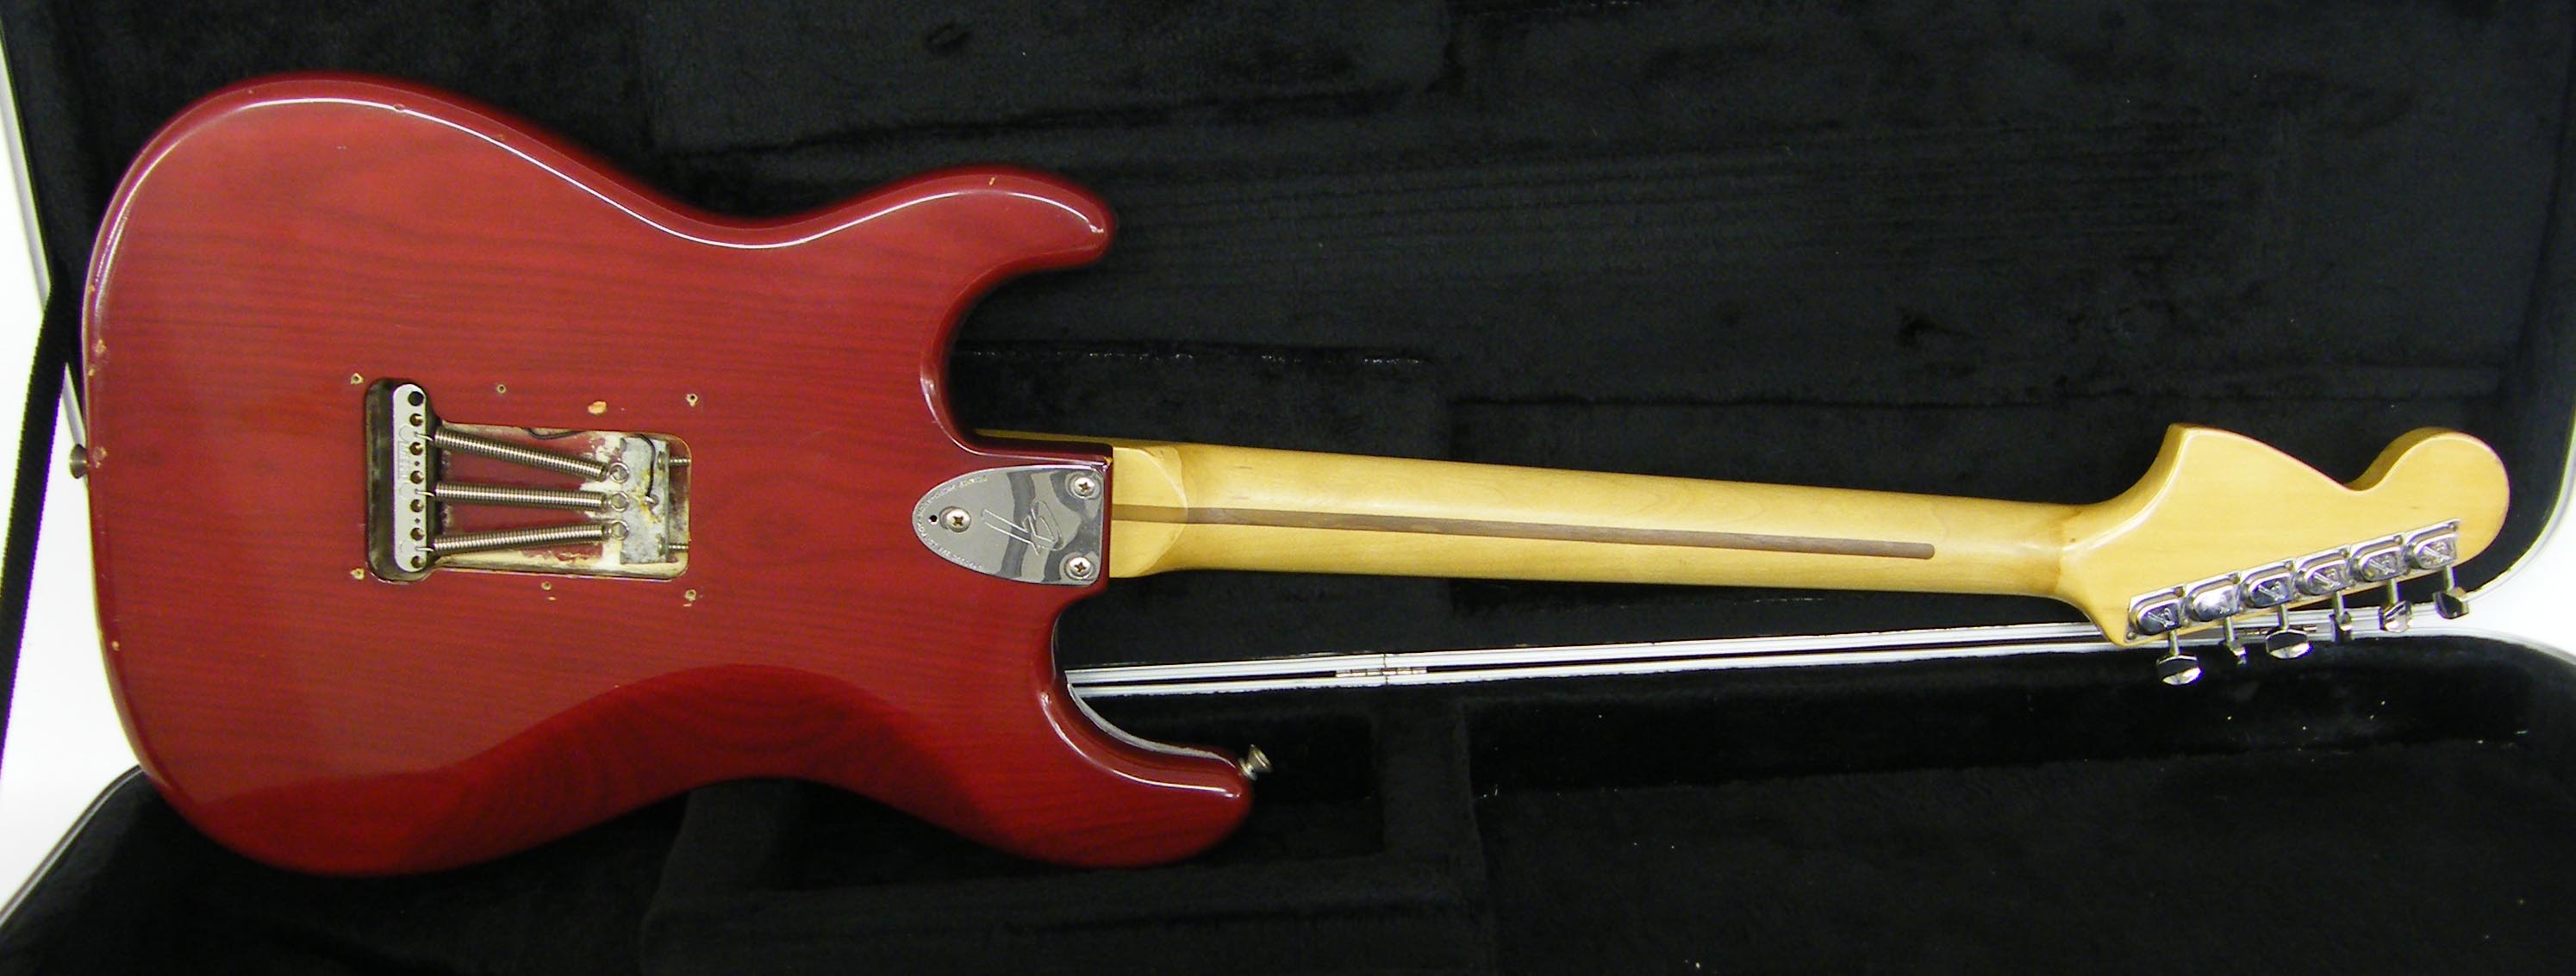 1979 Fender Stratocaster electric guitar, made in USA, ser. no. F928809, transparent red finish with - Image 2 of 2